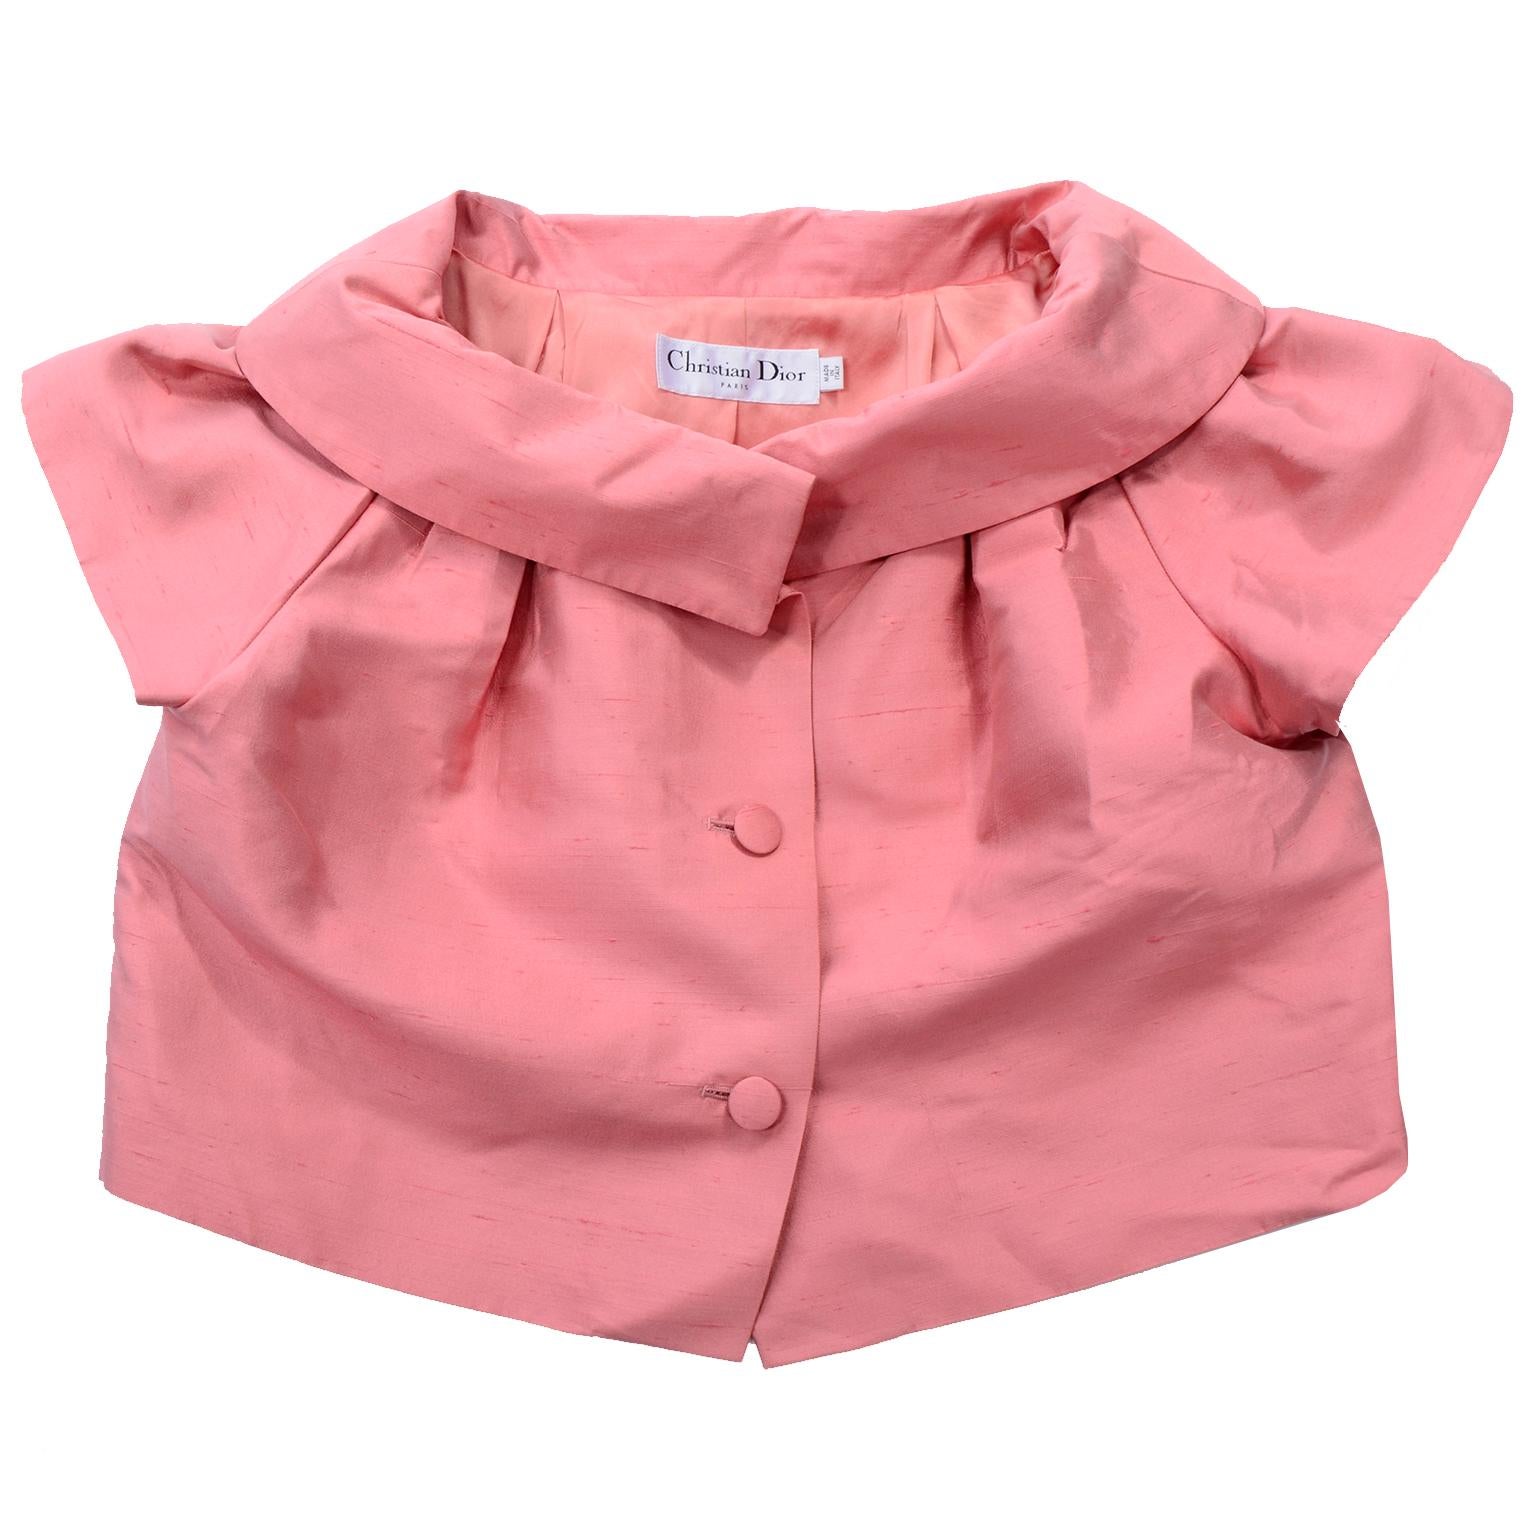 John Galliano for Christian Dior 1960s Inspired Pink 2008 Vintage Jacket Top 6